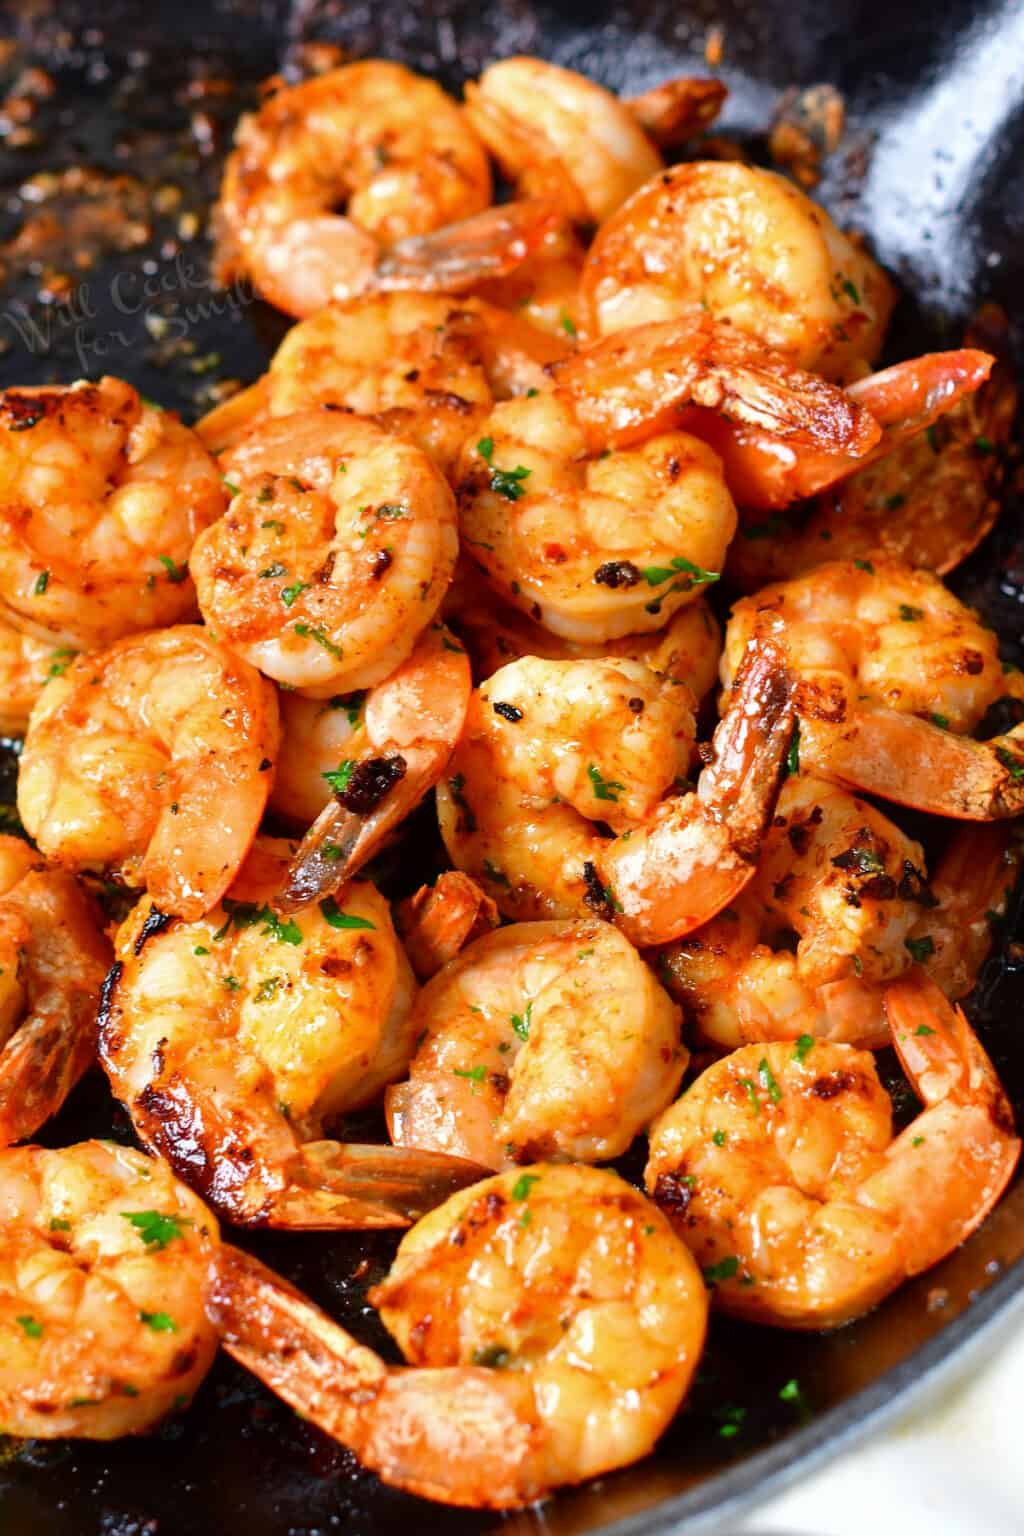 Recipes That Use Cooked Shrimp - Design Corral